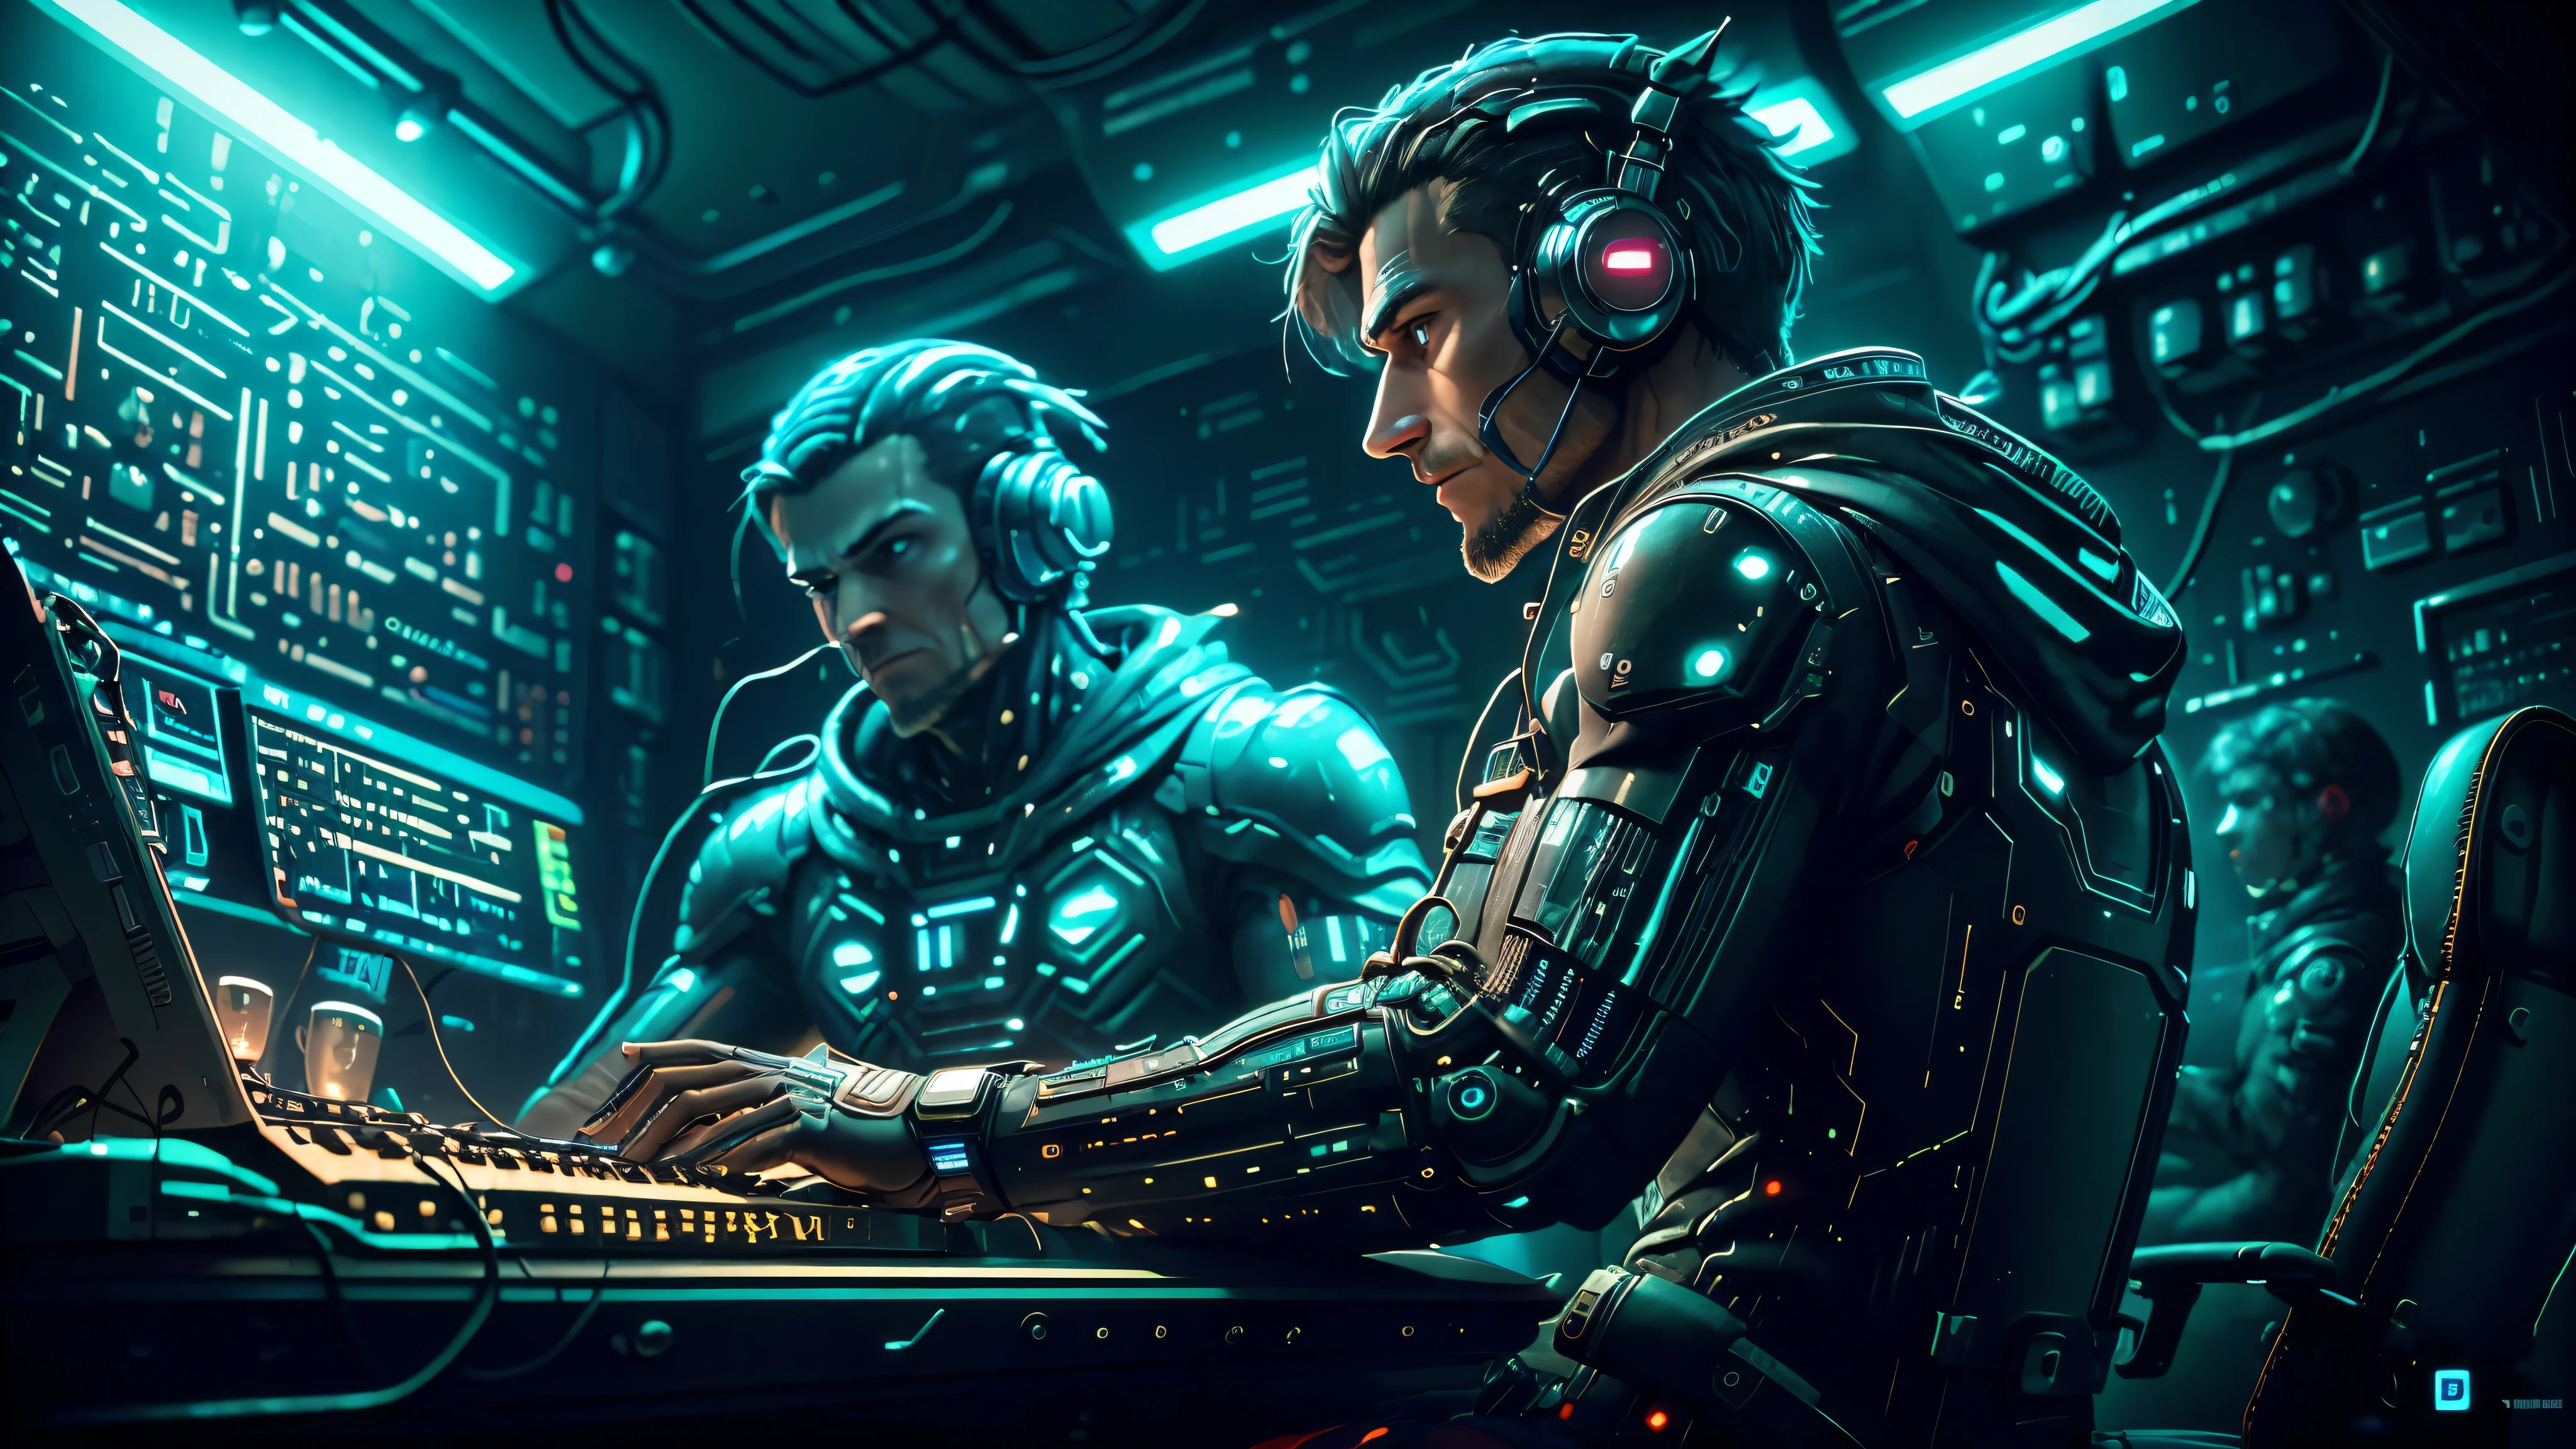 realistic, Cinematic, High quality: a man wearing robotic prosthetics sits in front of a MIDI keyboard and a computer. Ils sont dans un studio d&#39;enregistrement cyberpunk, a room with cables and pipes, with a synthesizer hanging on the wall. Langue cible, Atmosphère, vaisseau spatial futuriste, Photo de profil prise